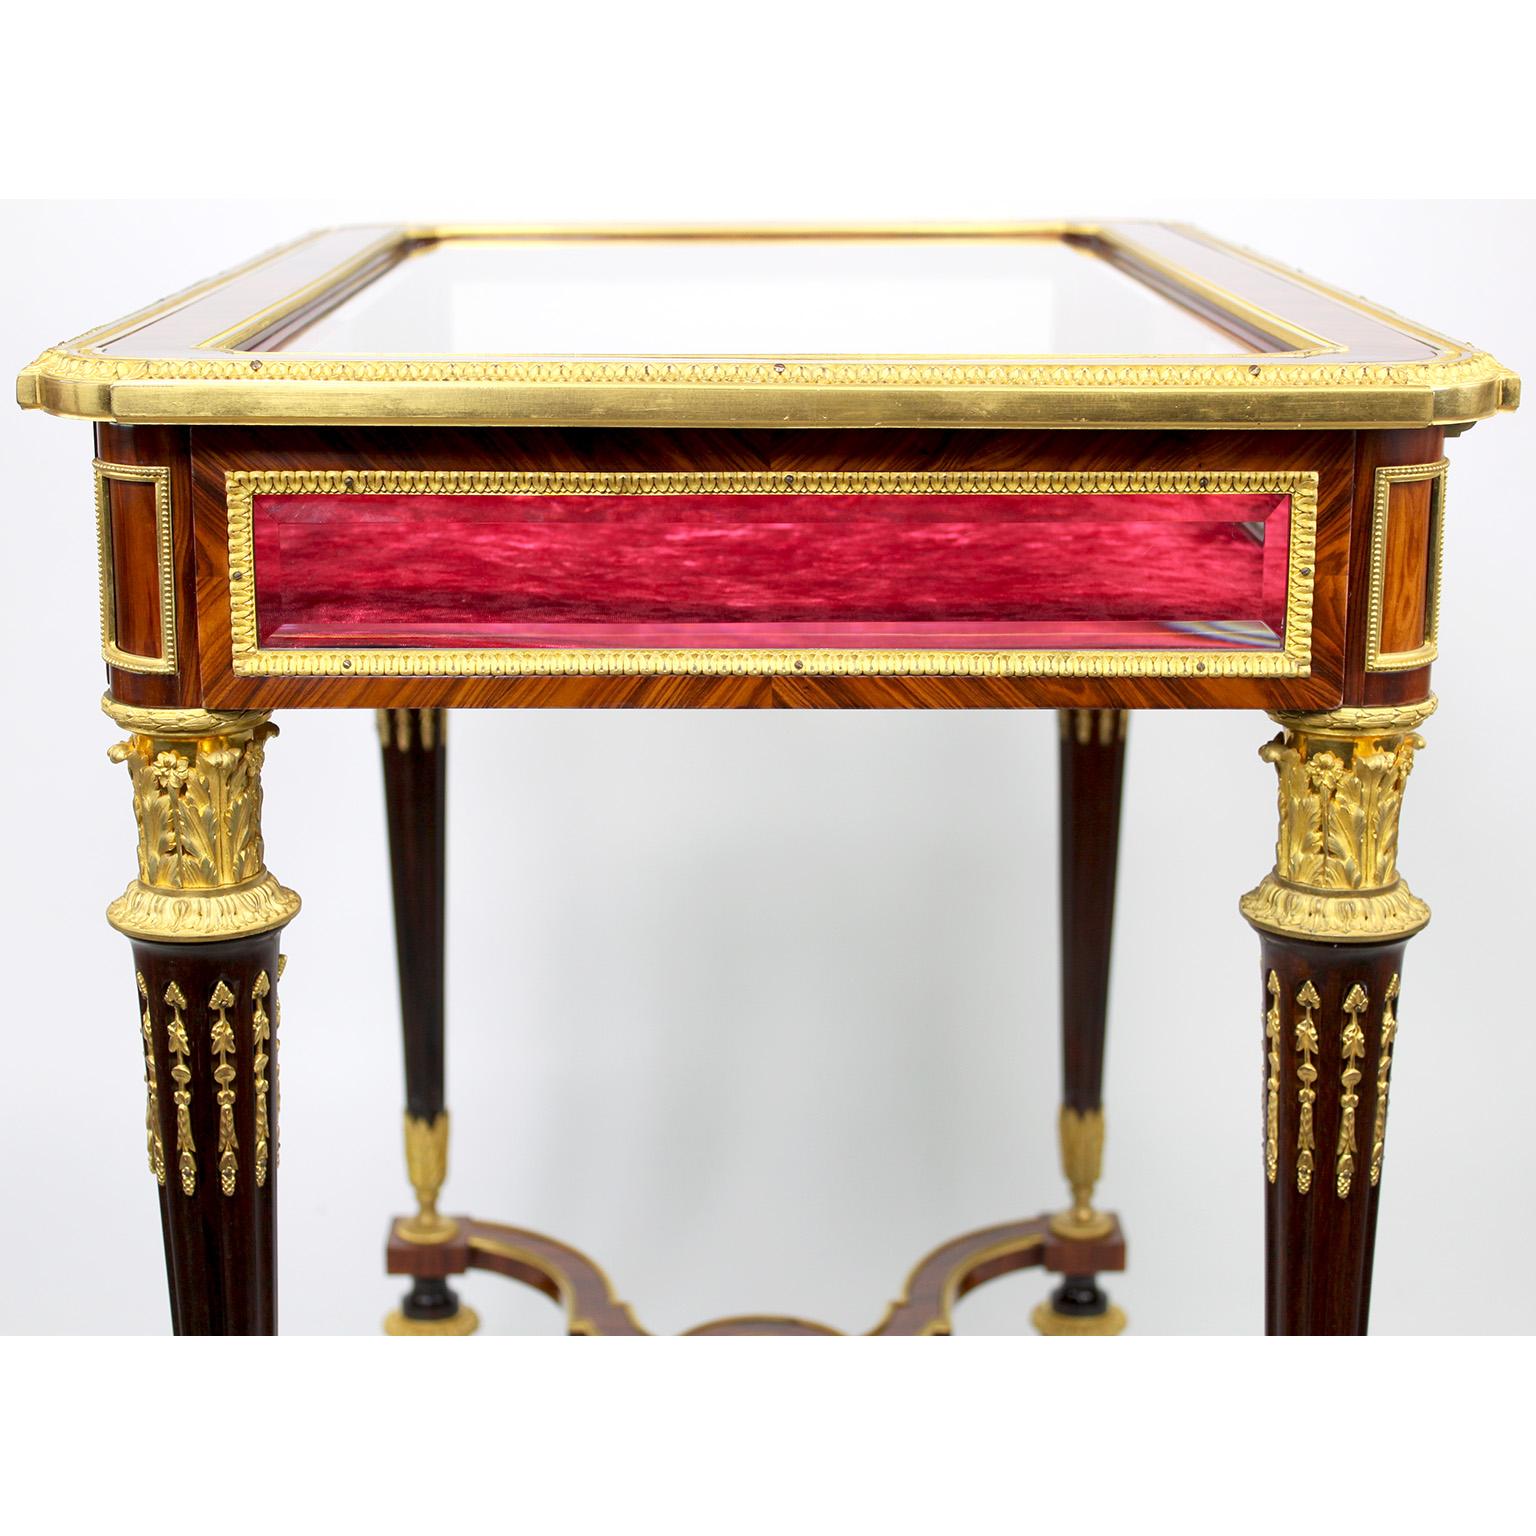 A 19th Century Louis XVI Style Ormolu Mounted Vitrine Table Attr. Henry Dasson  For Sale 5